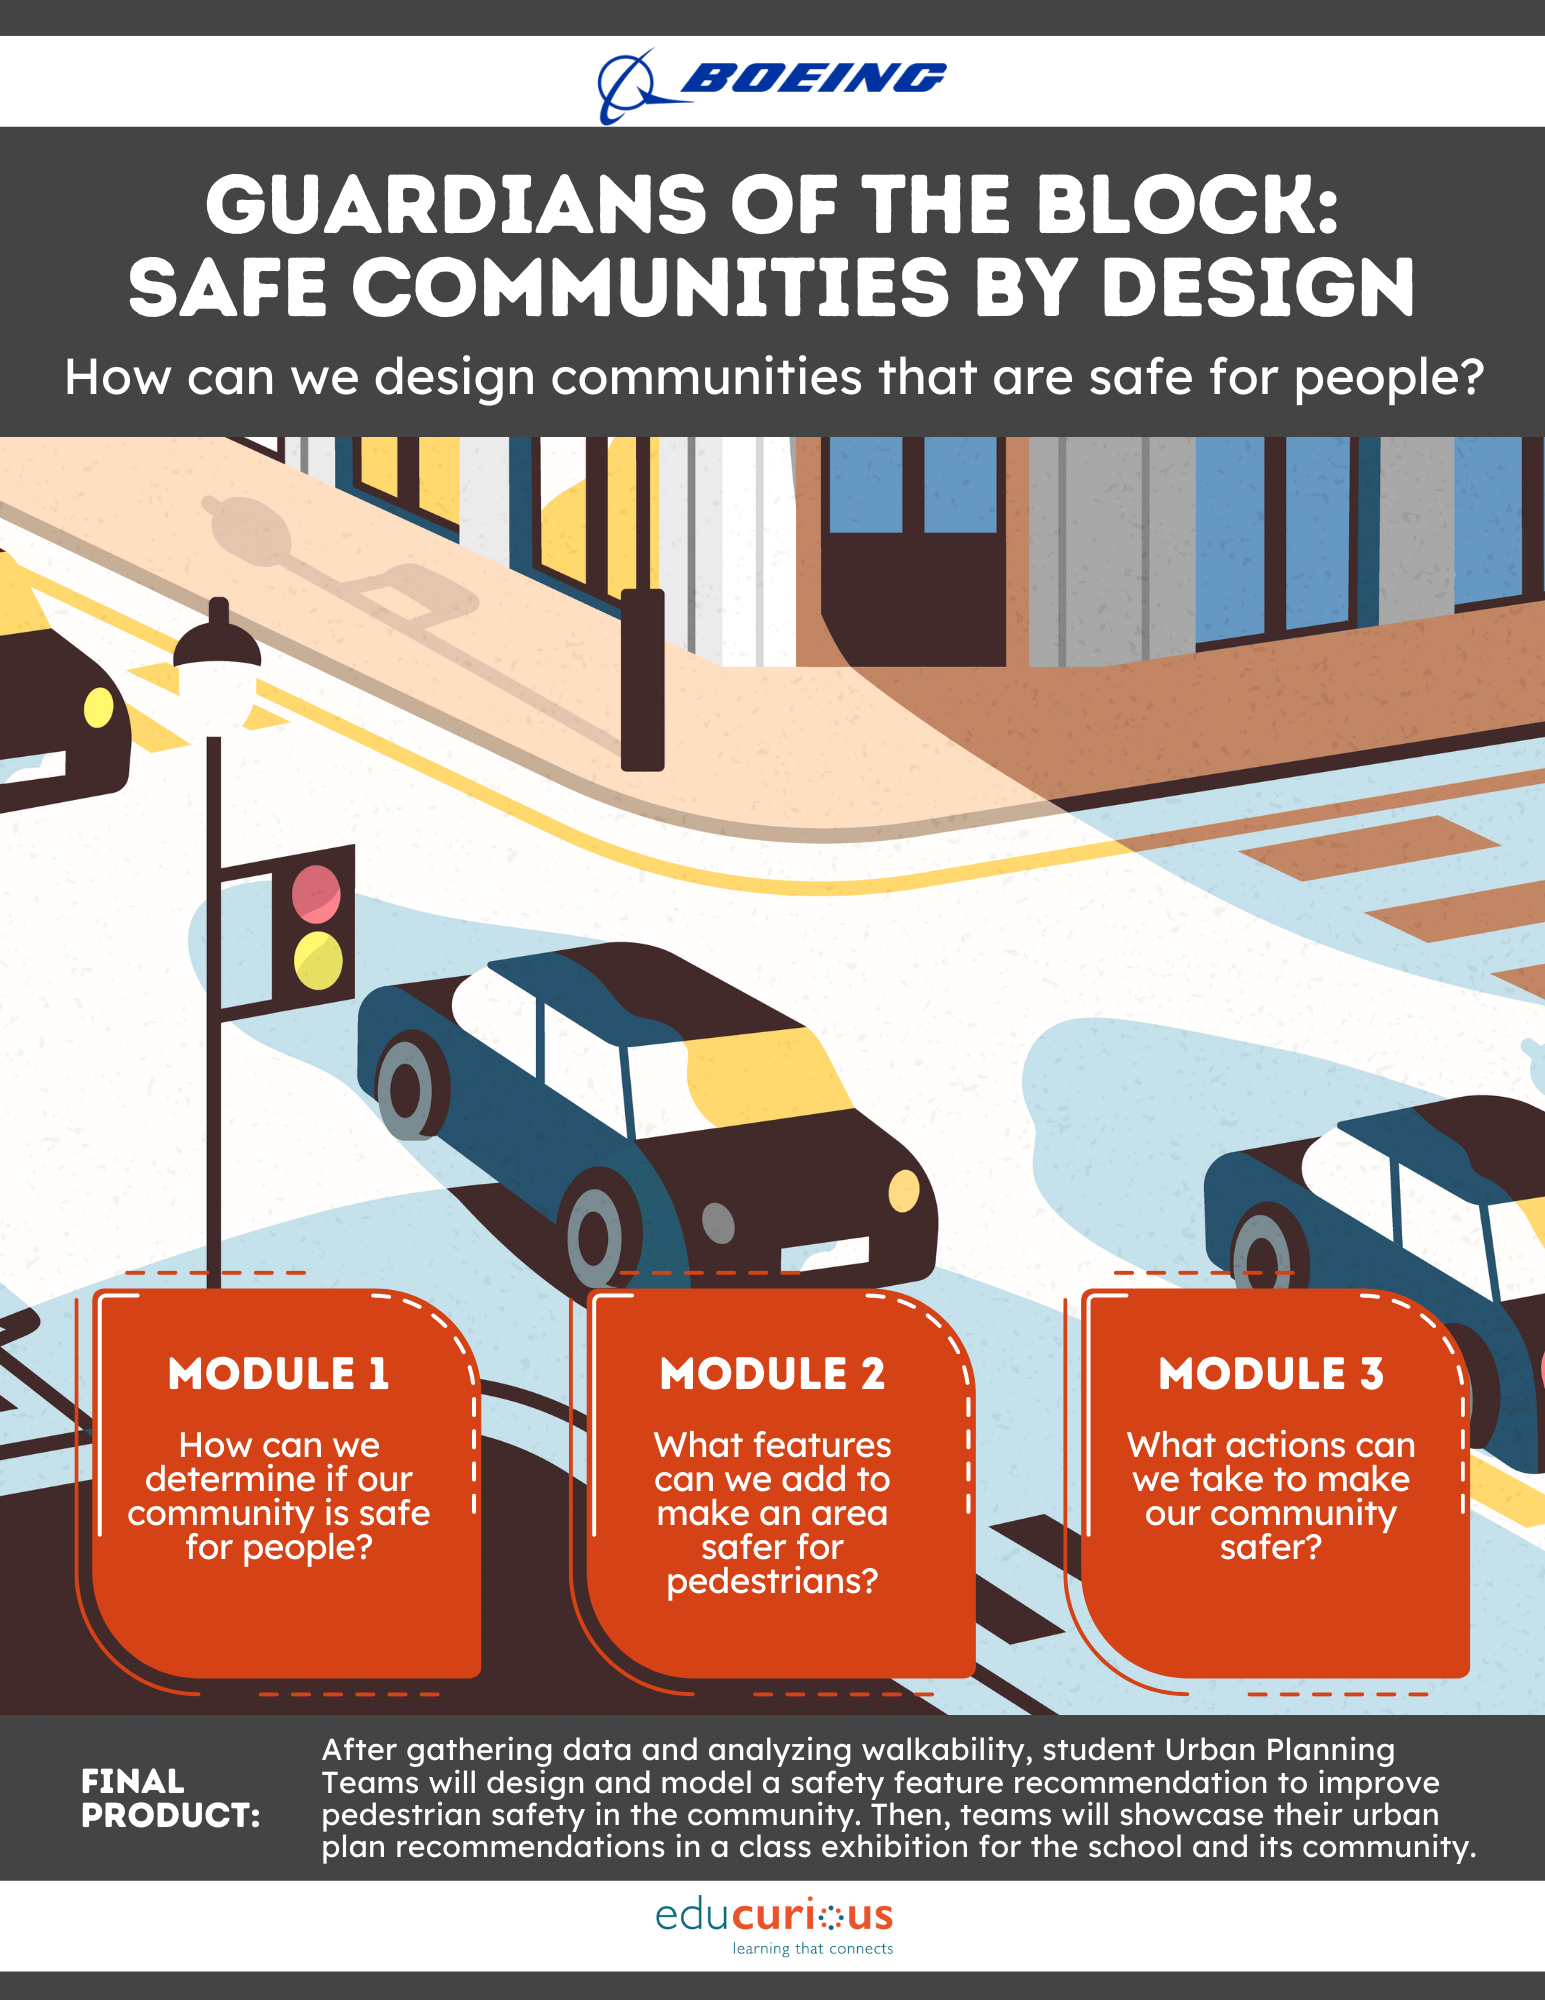 Guardians of the Block: Safe Communities by Design poster with three modules